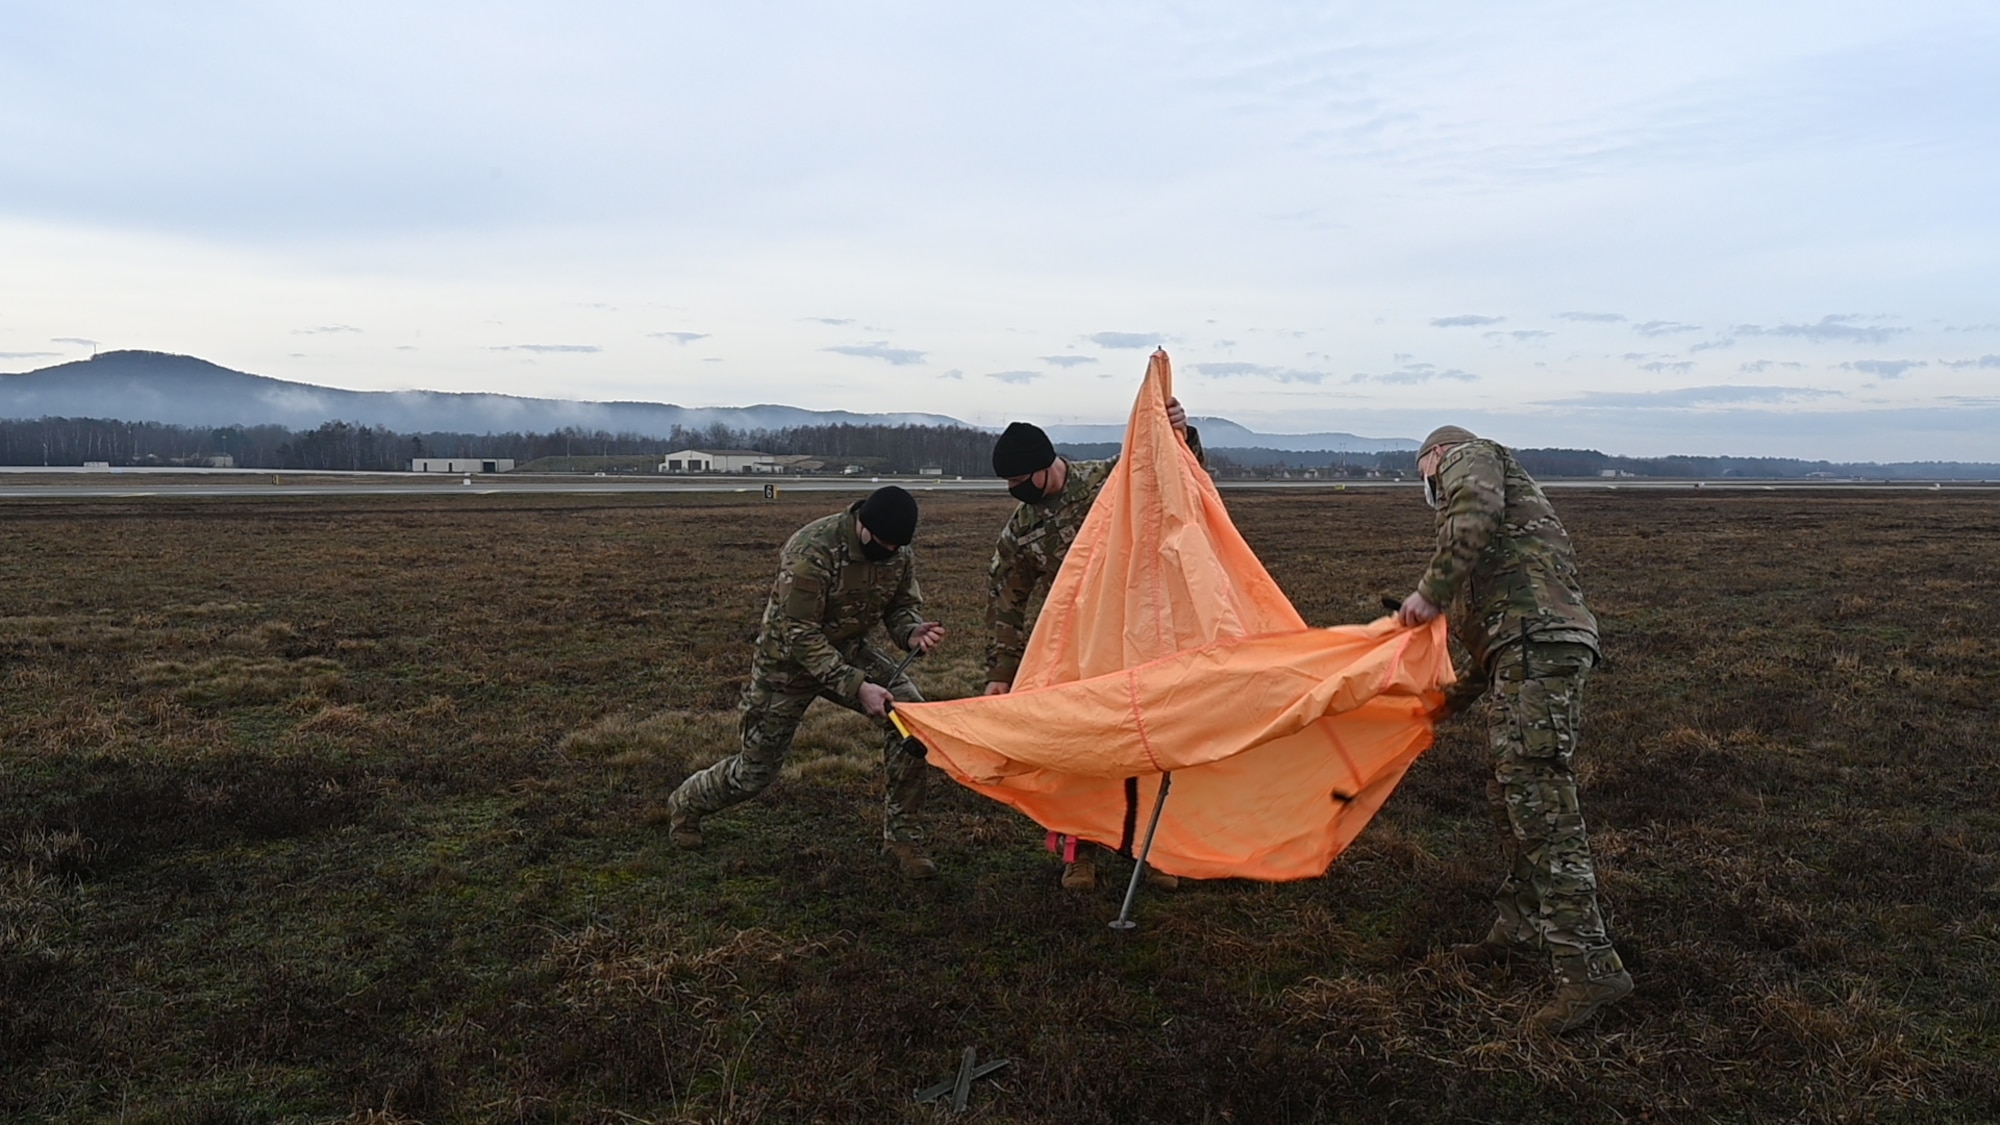 U.S. Air Force Airmen from the 37th AS, 86th Operations Support Squadron, 435th Contingency Response Group and U.S. Army Soldiers from the 5th Quartermaster Company worked together to make the personnel airdrop possible.